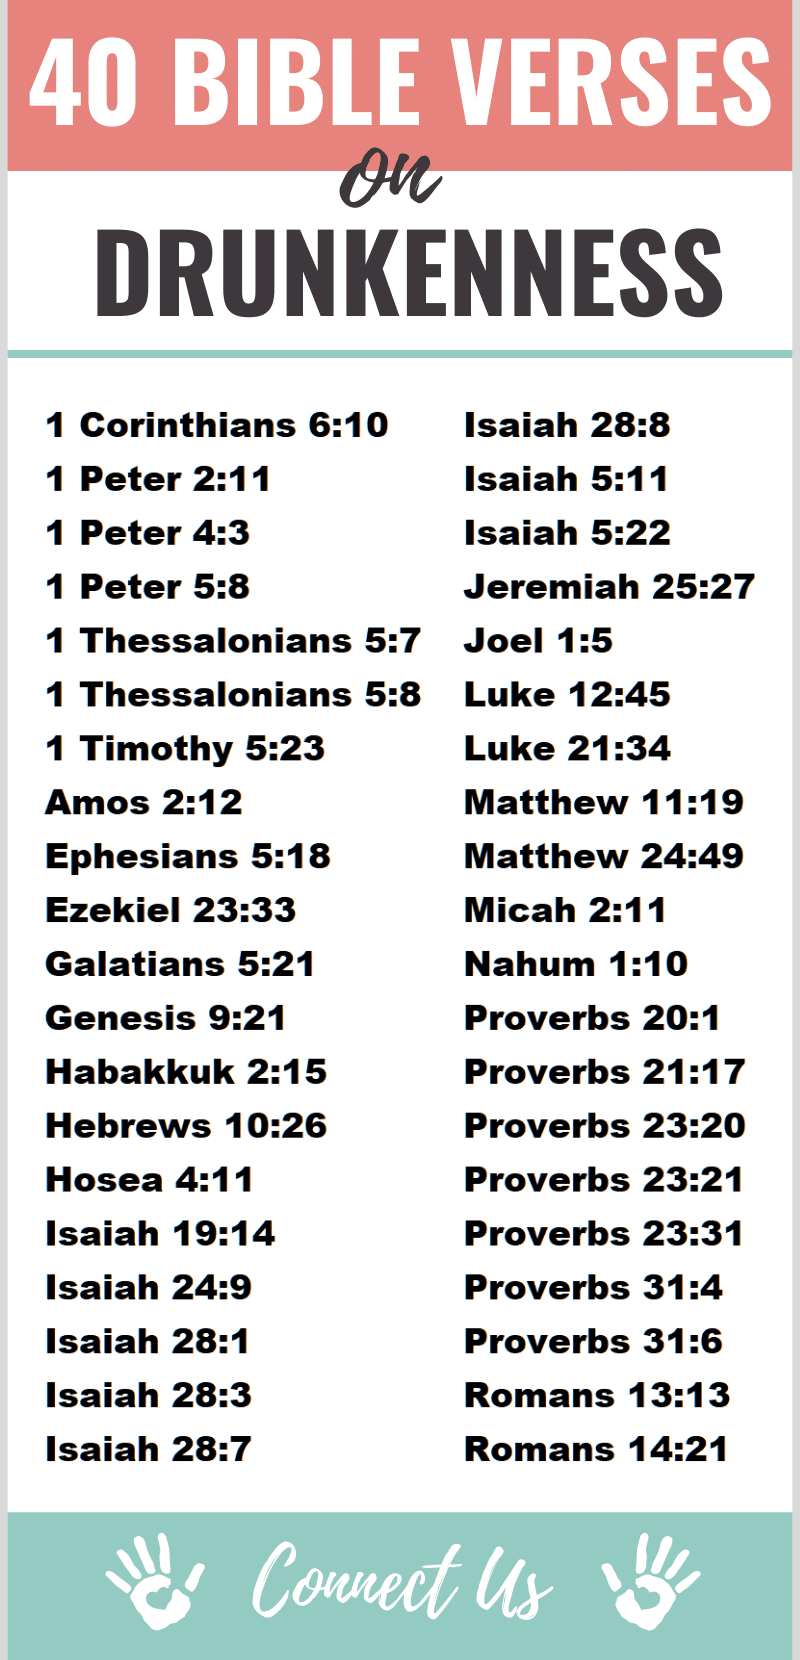 Bible Verses on Drunkenness